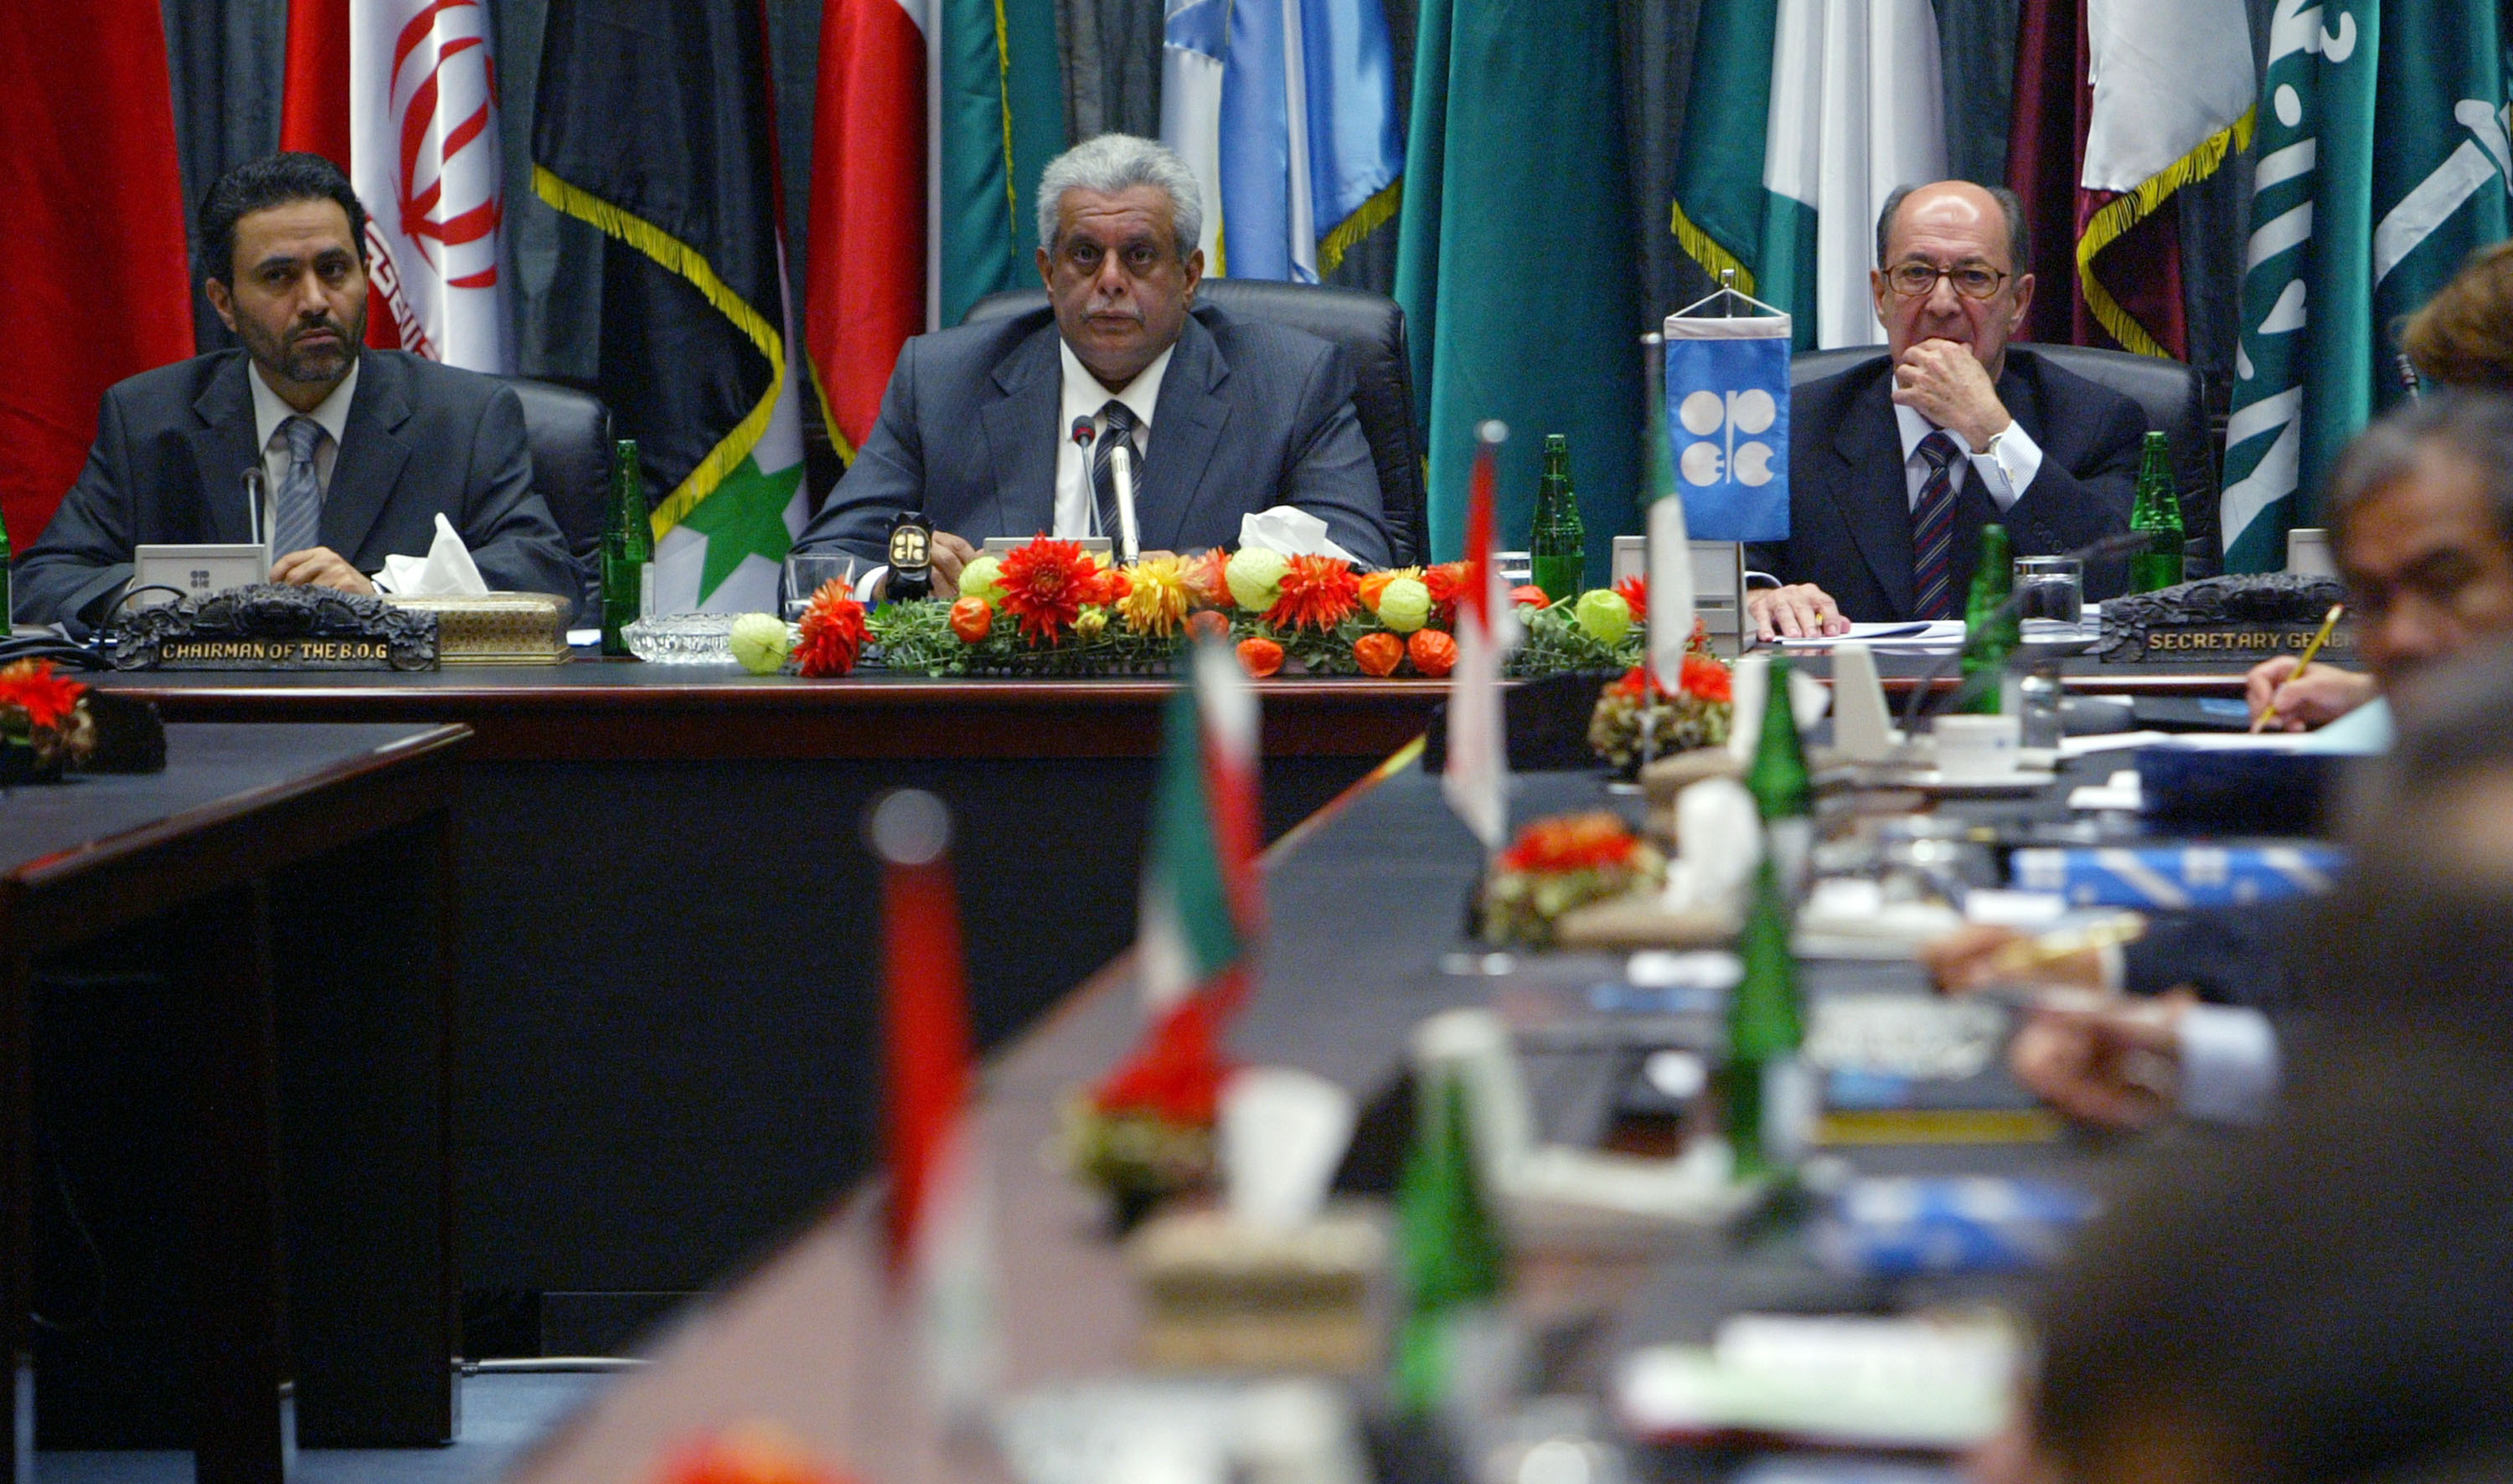 Oil Ministers Attend 127th OPEC Meeting